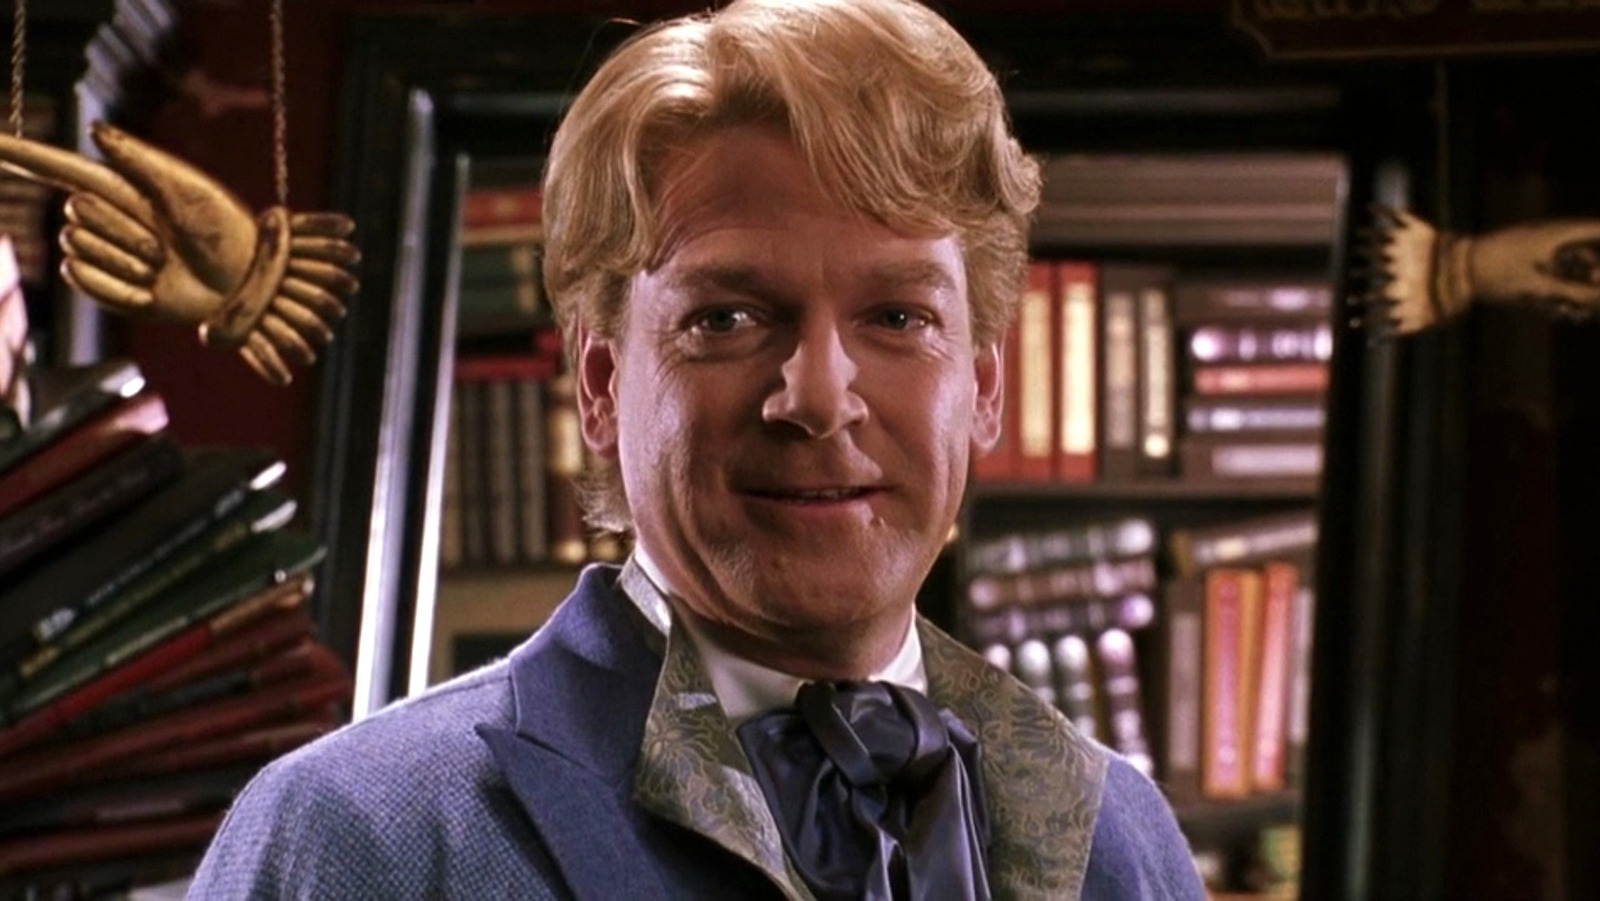 Gilderoy Lockhart Never Got His Callback In The Harry Potter Movies